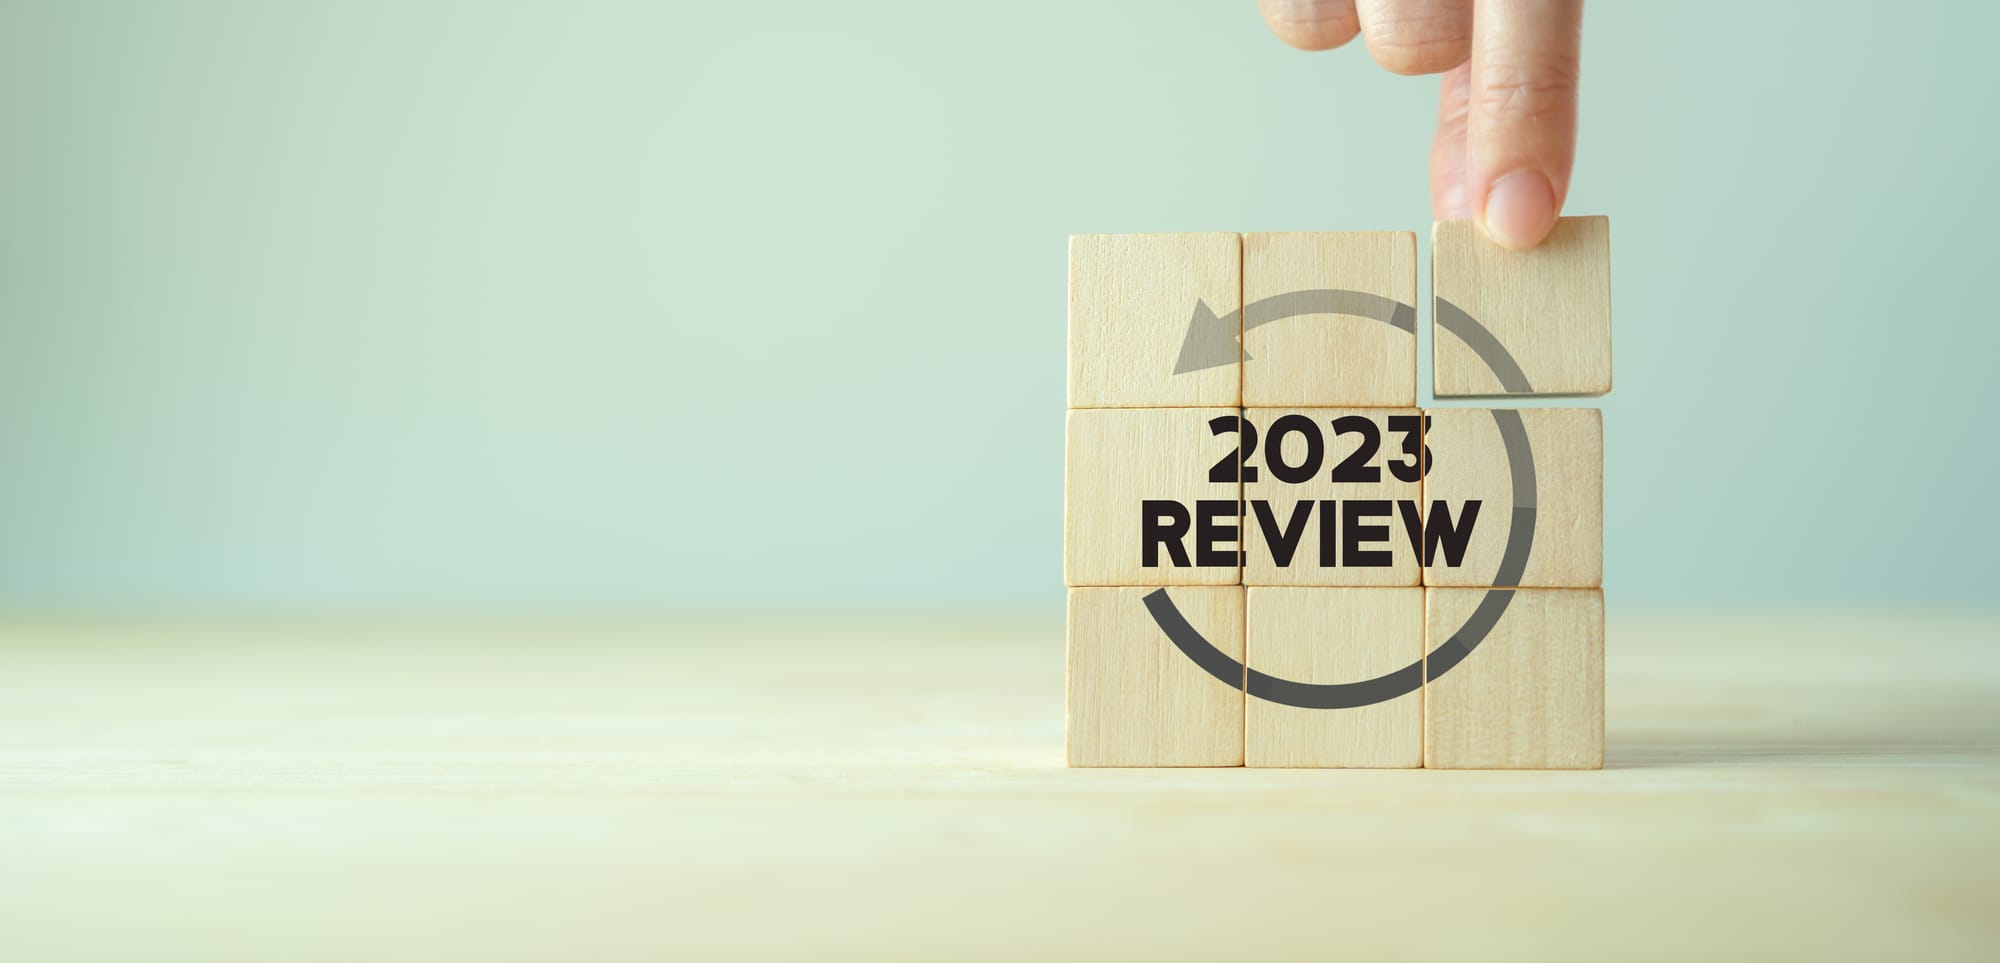 Annual Review of 2023